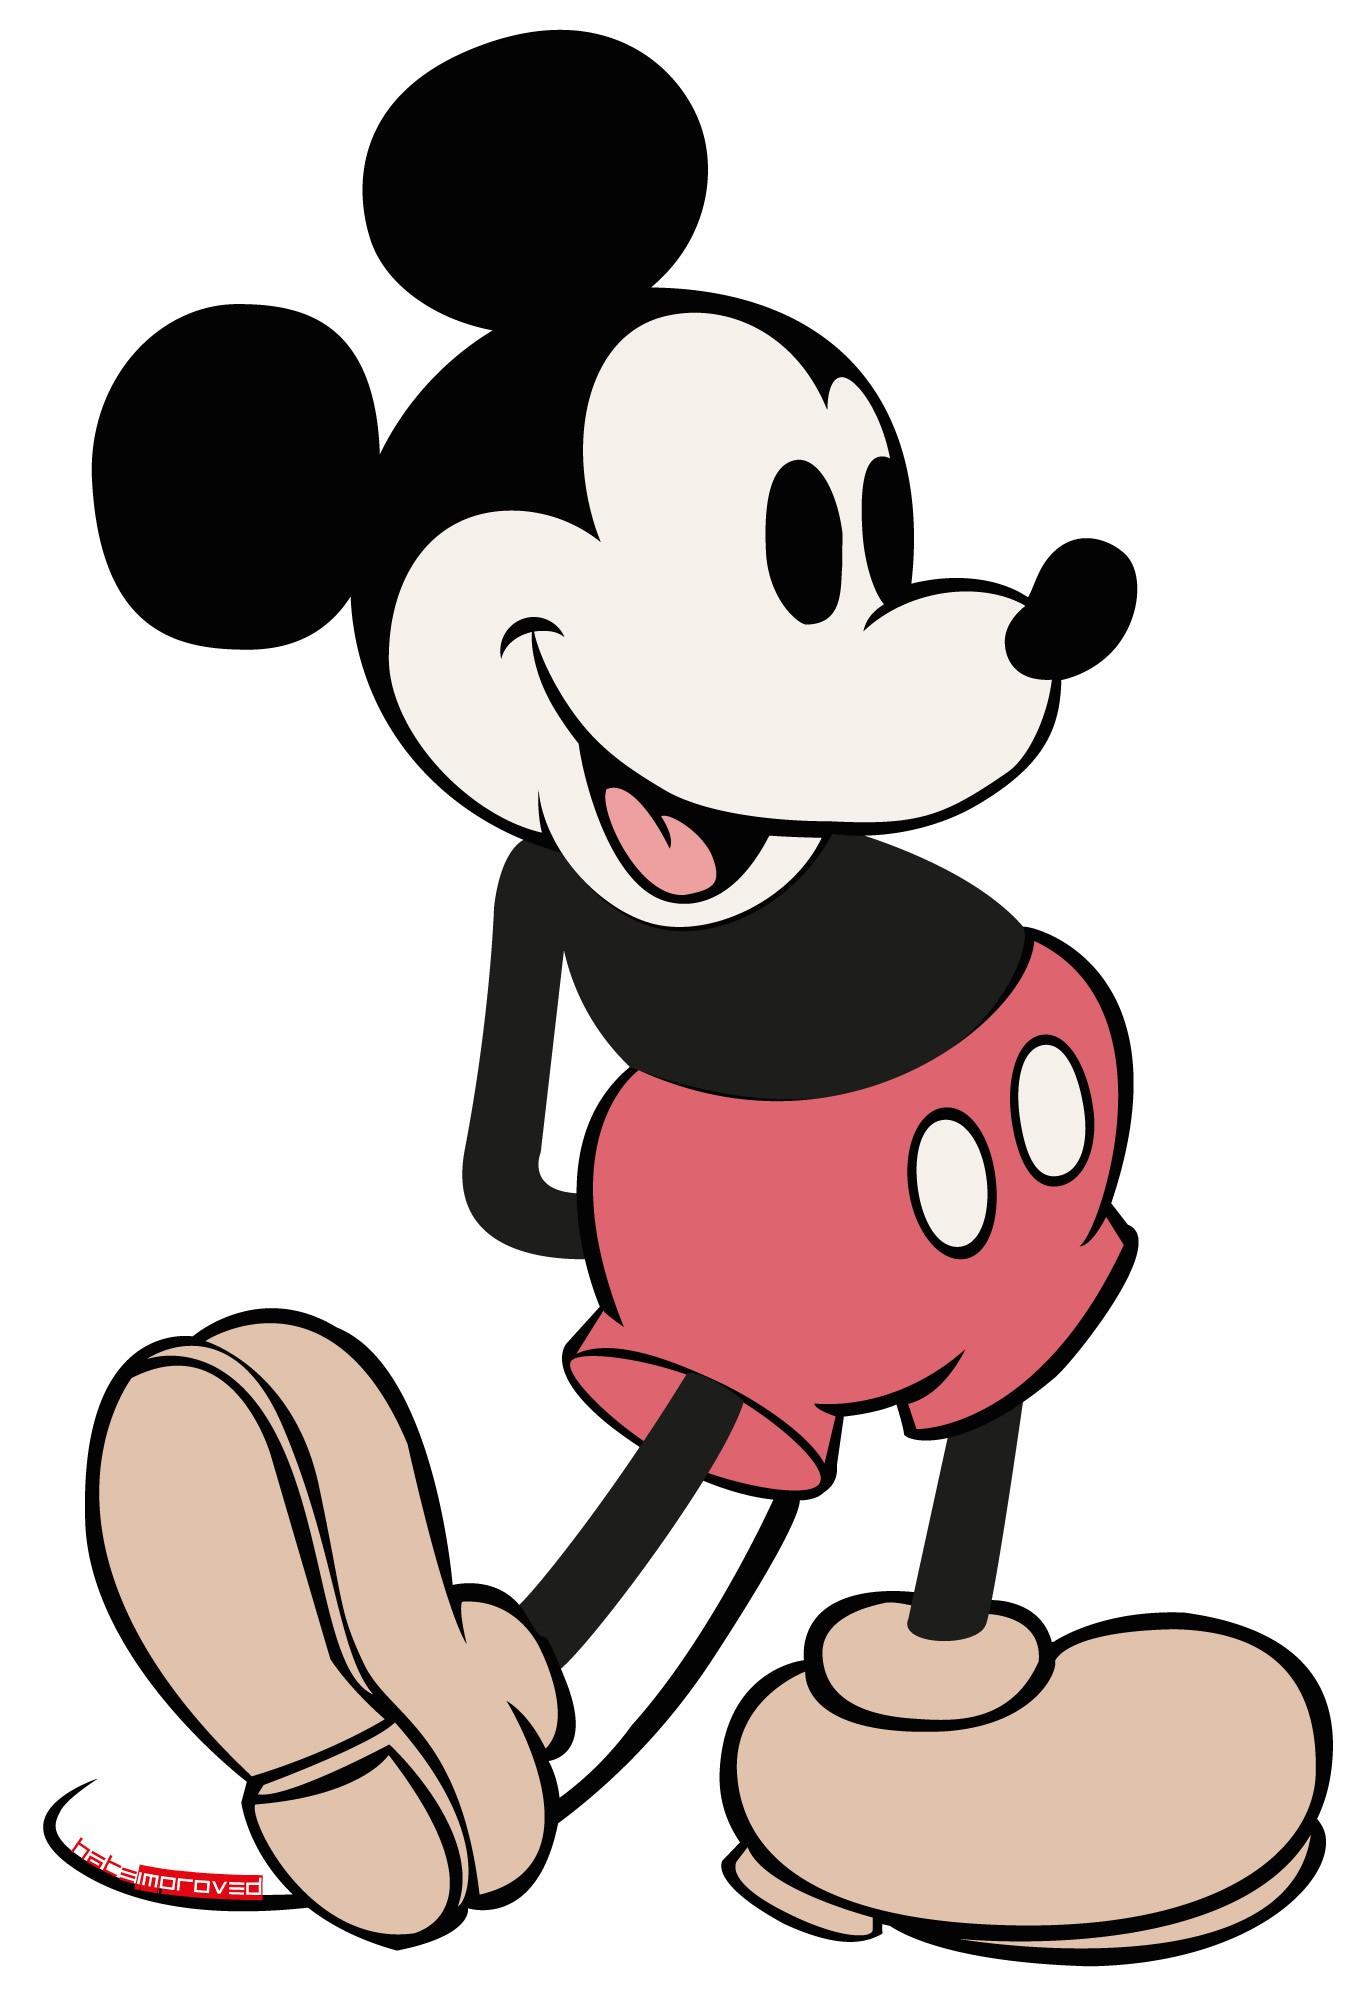 1351 x 1994 · jpeg - Mickey Mouse background 1 Download free wallpapers for desktop and ...